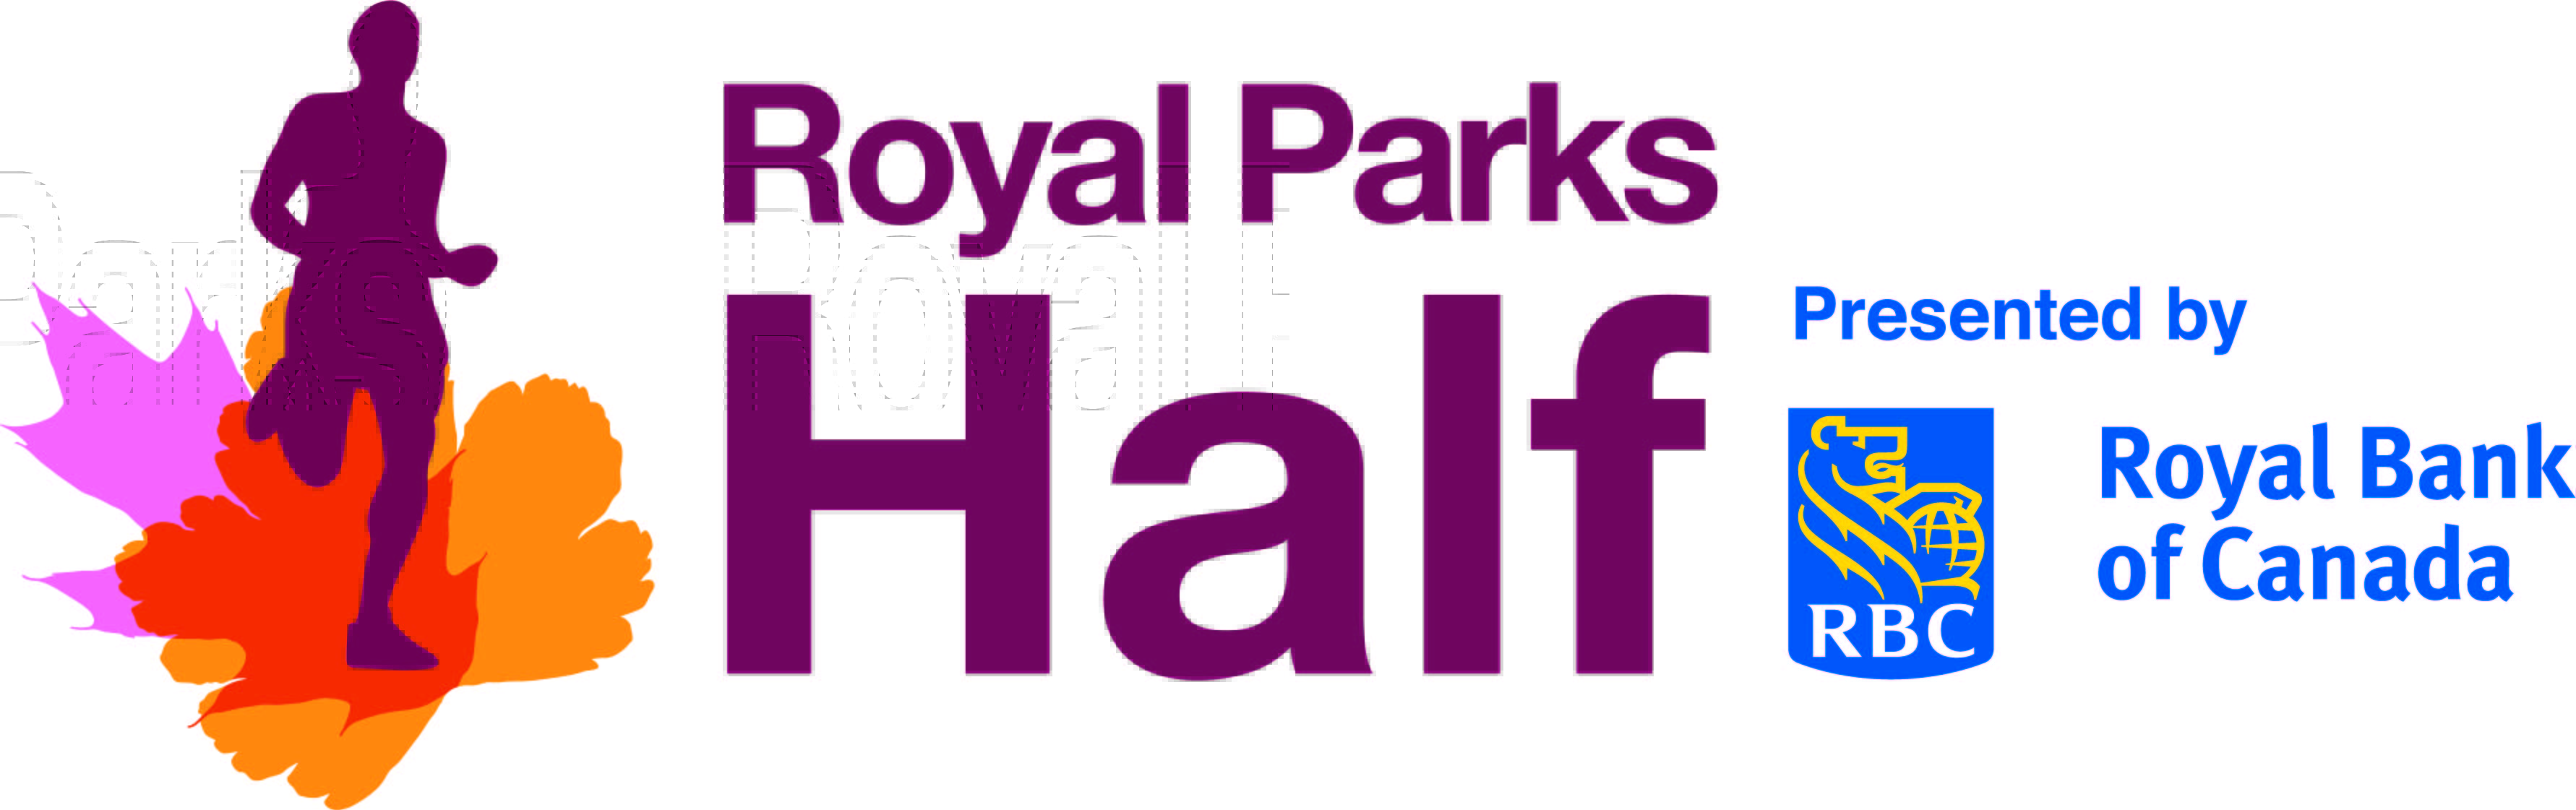 Take on the challenge of a exciting Half Marathon in the Royal Parks